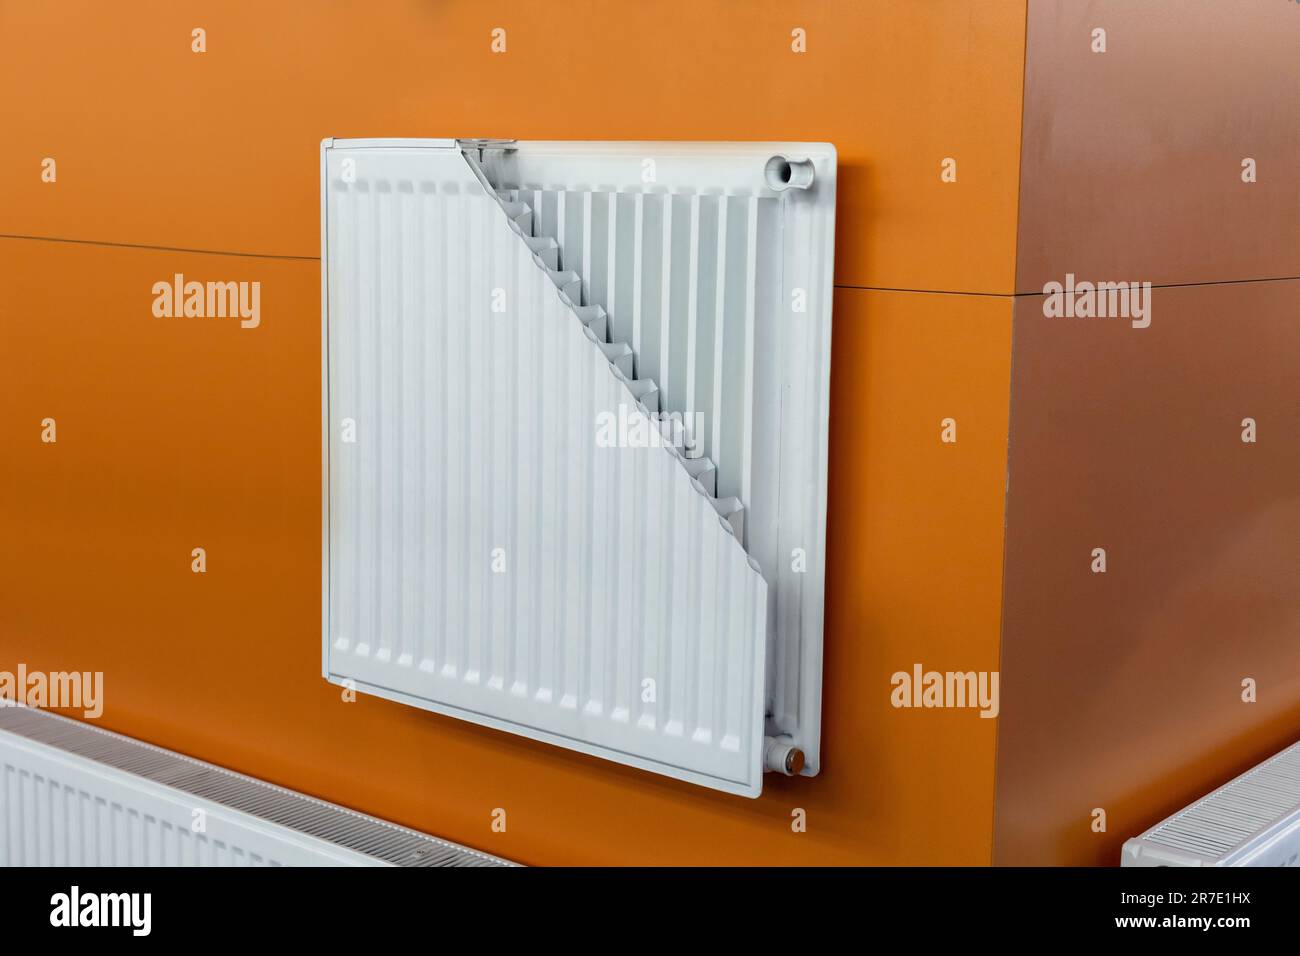 Radiator for home heating and air drying Stock Photo